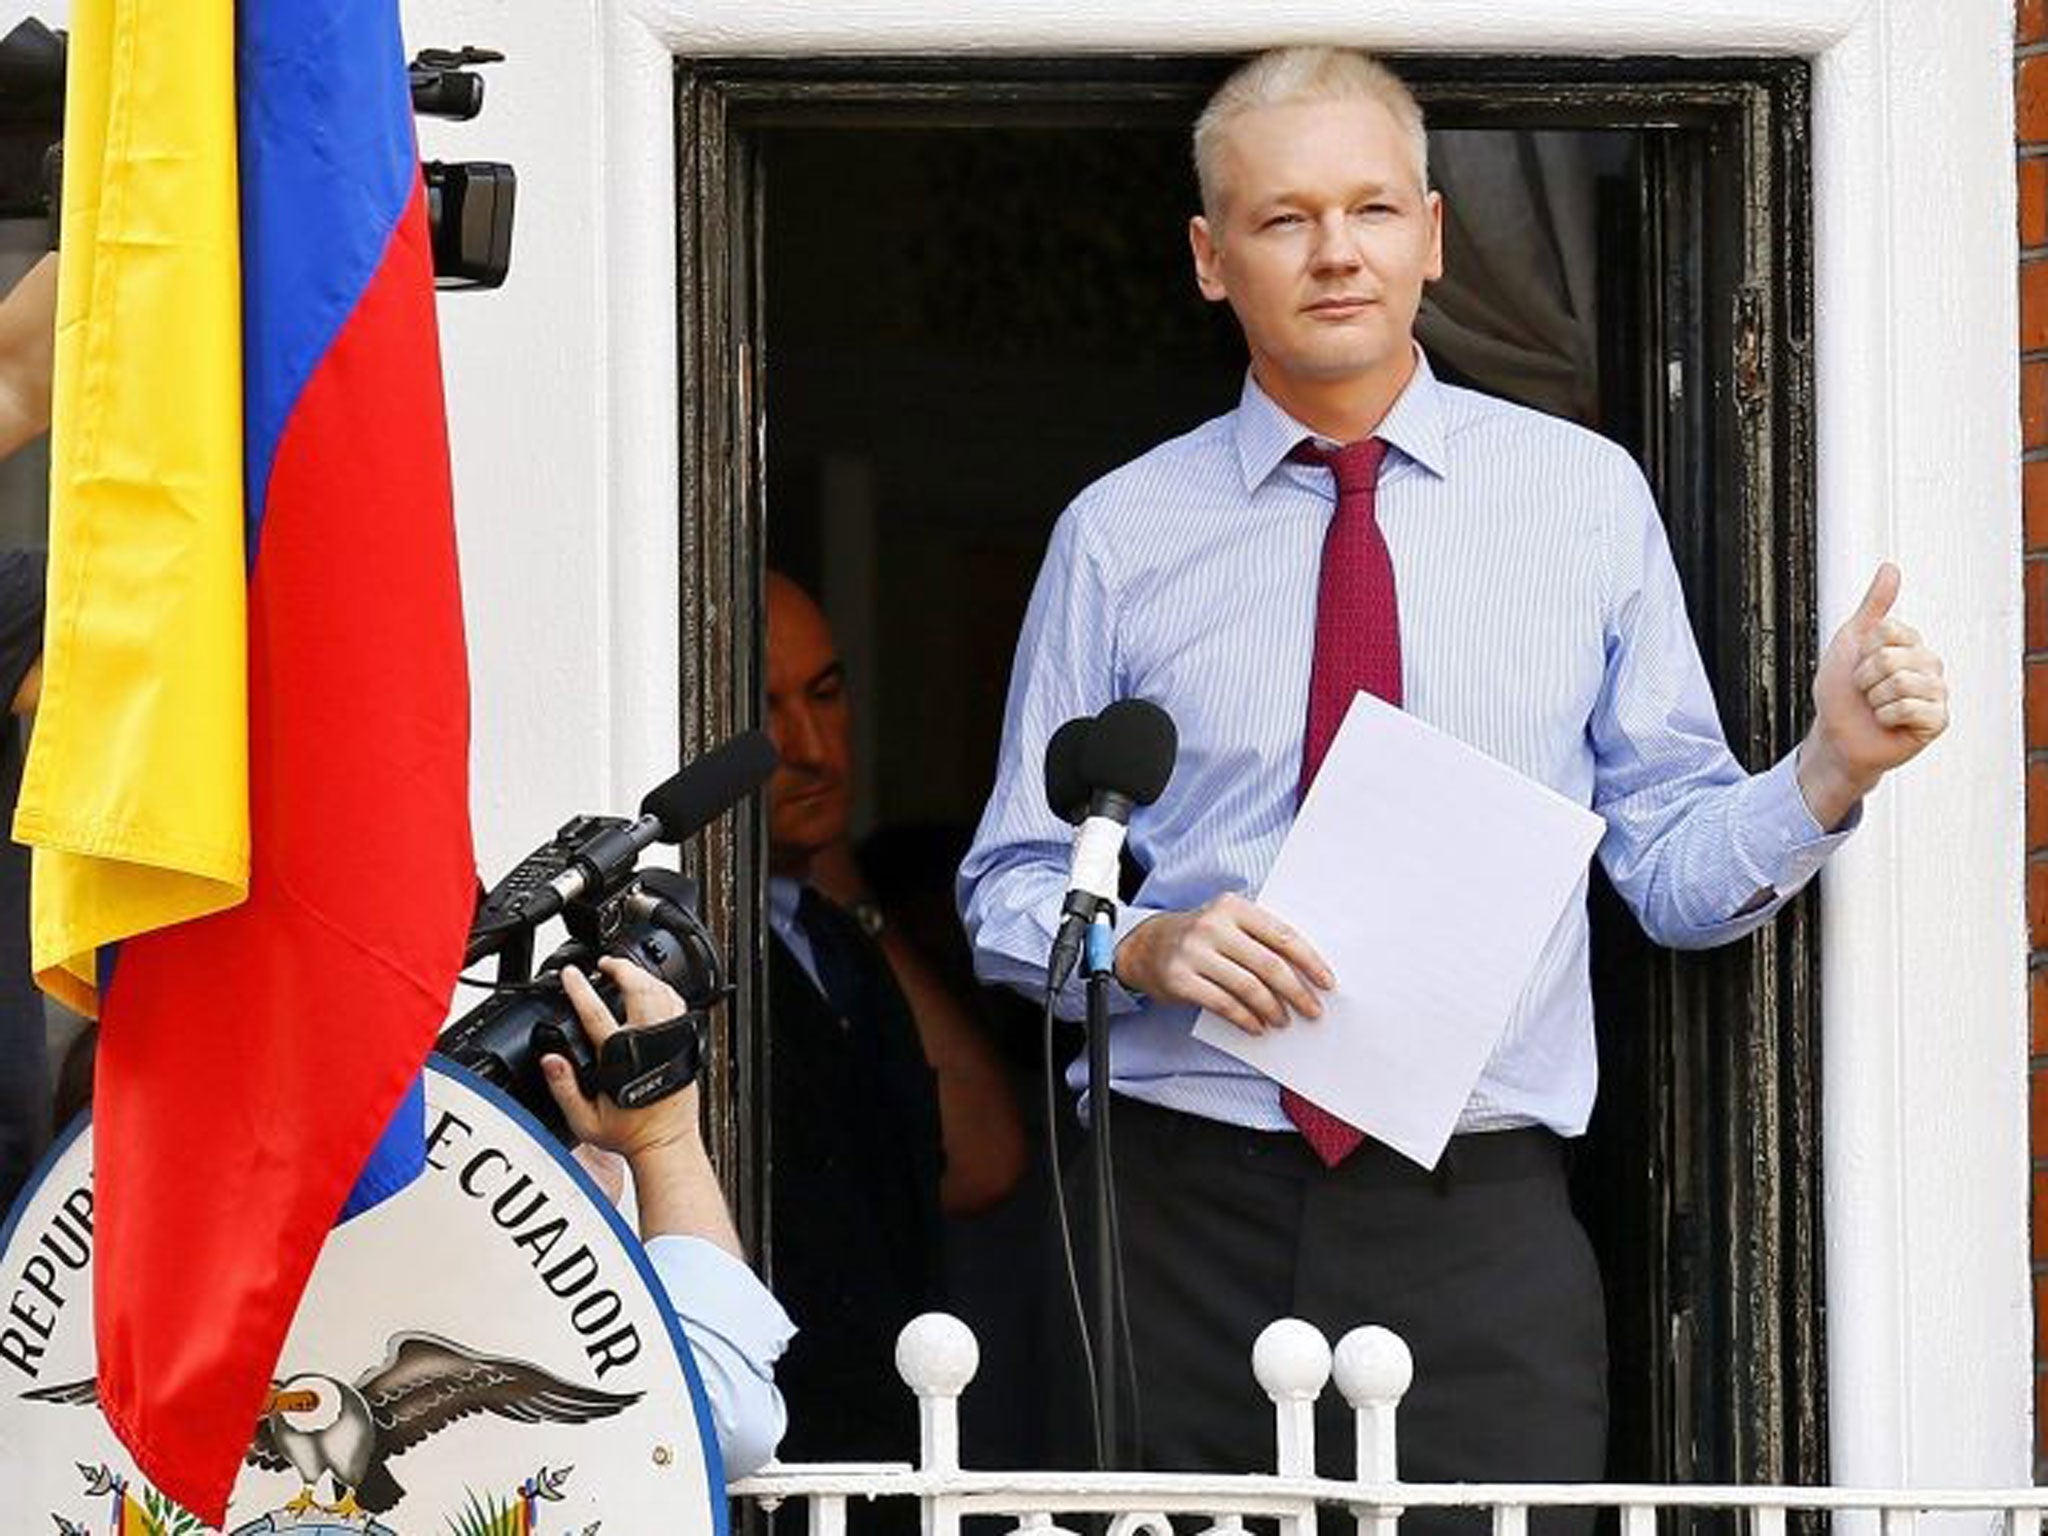 Assange has been holed up in Ecuador's west London embassy for almost a year